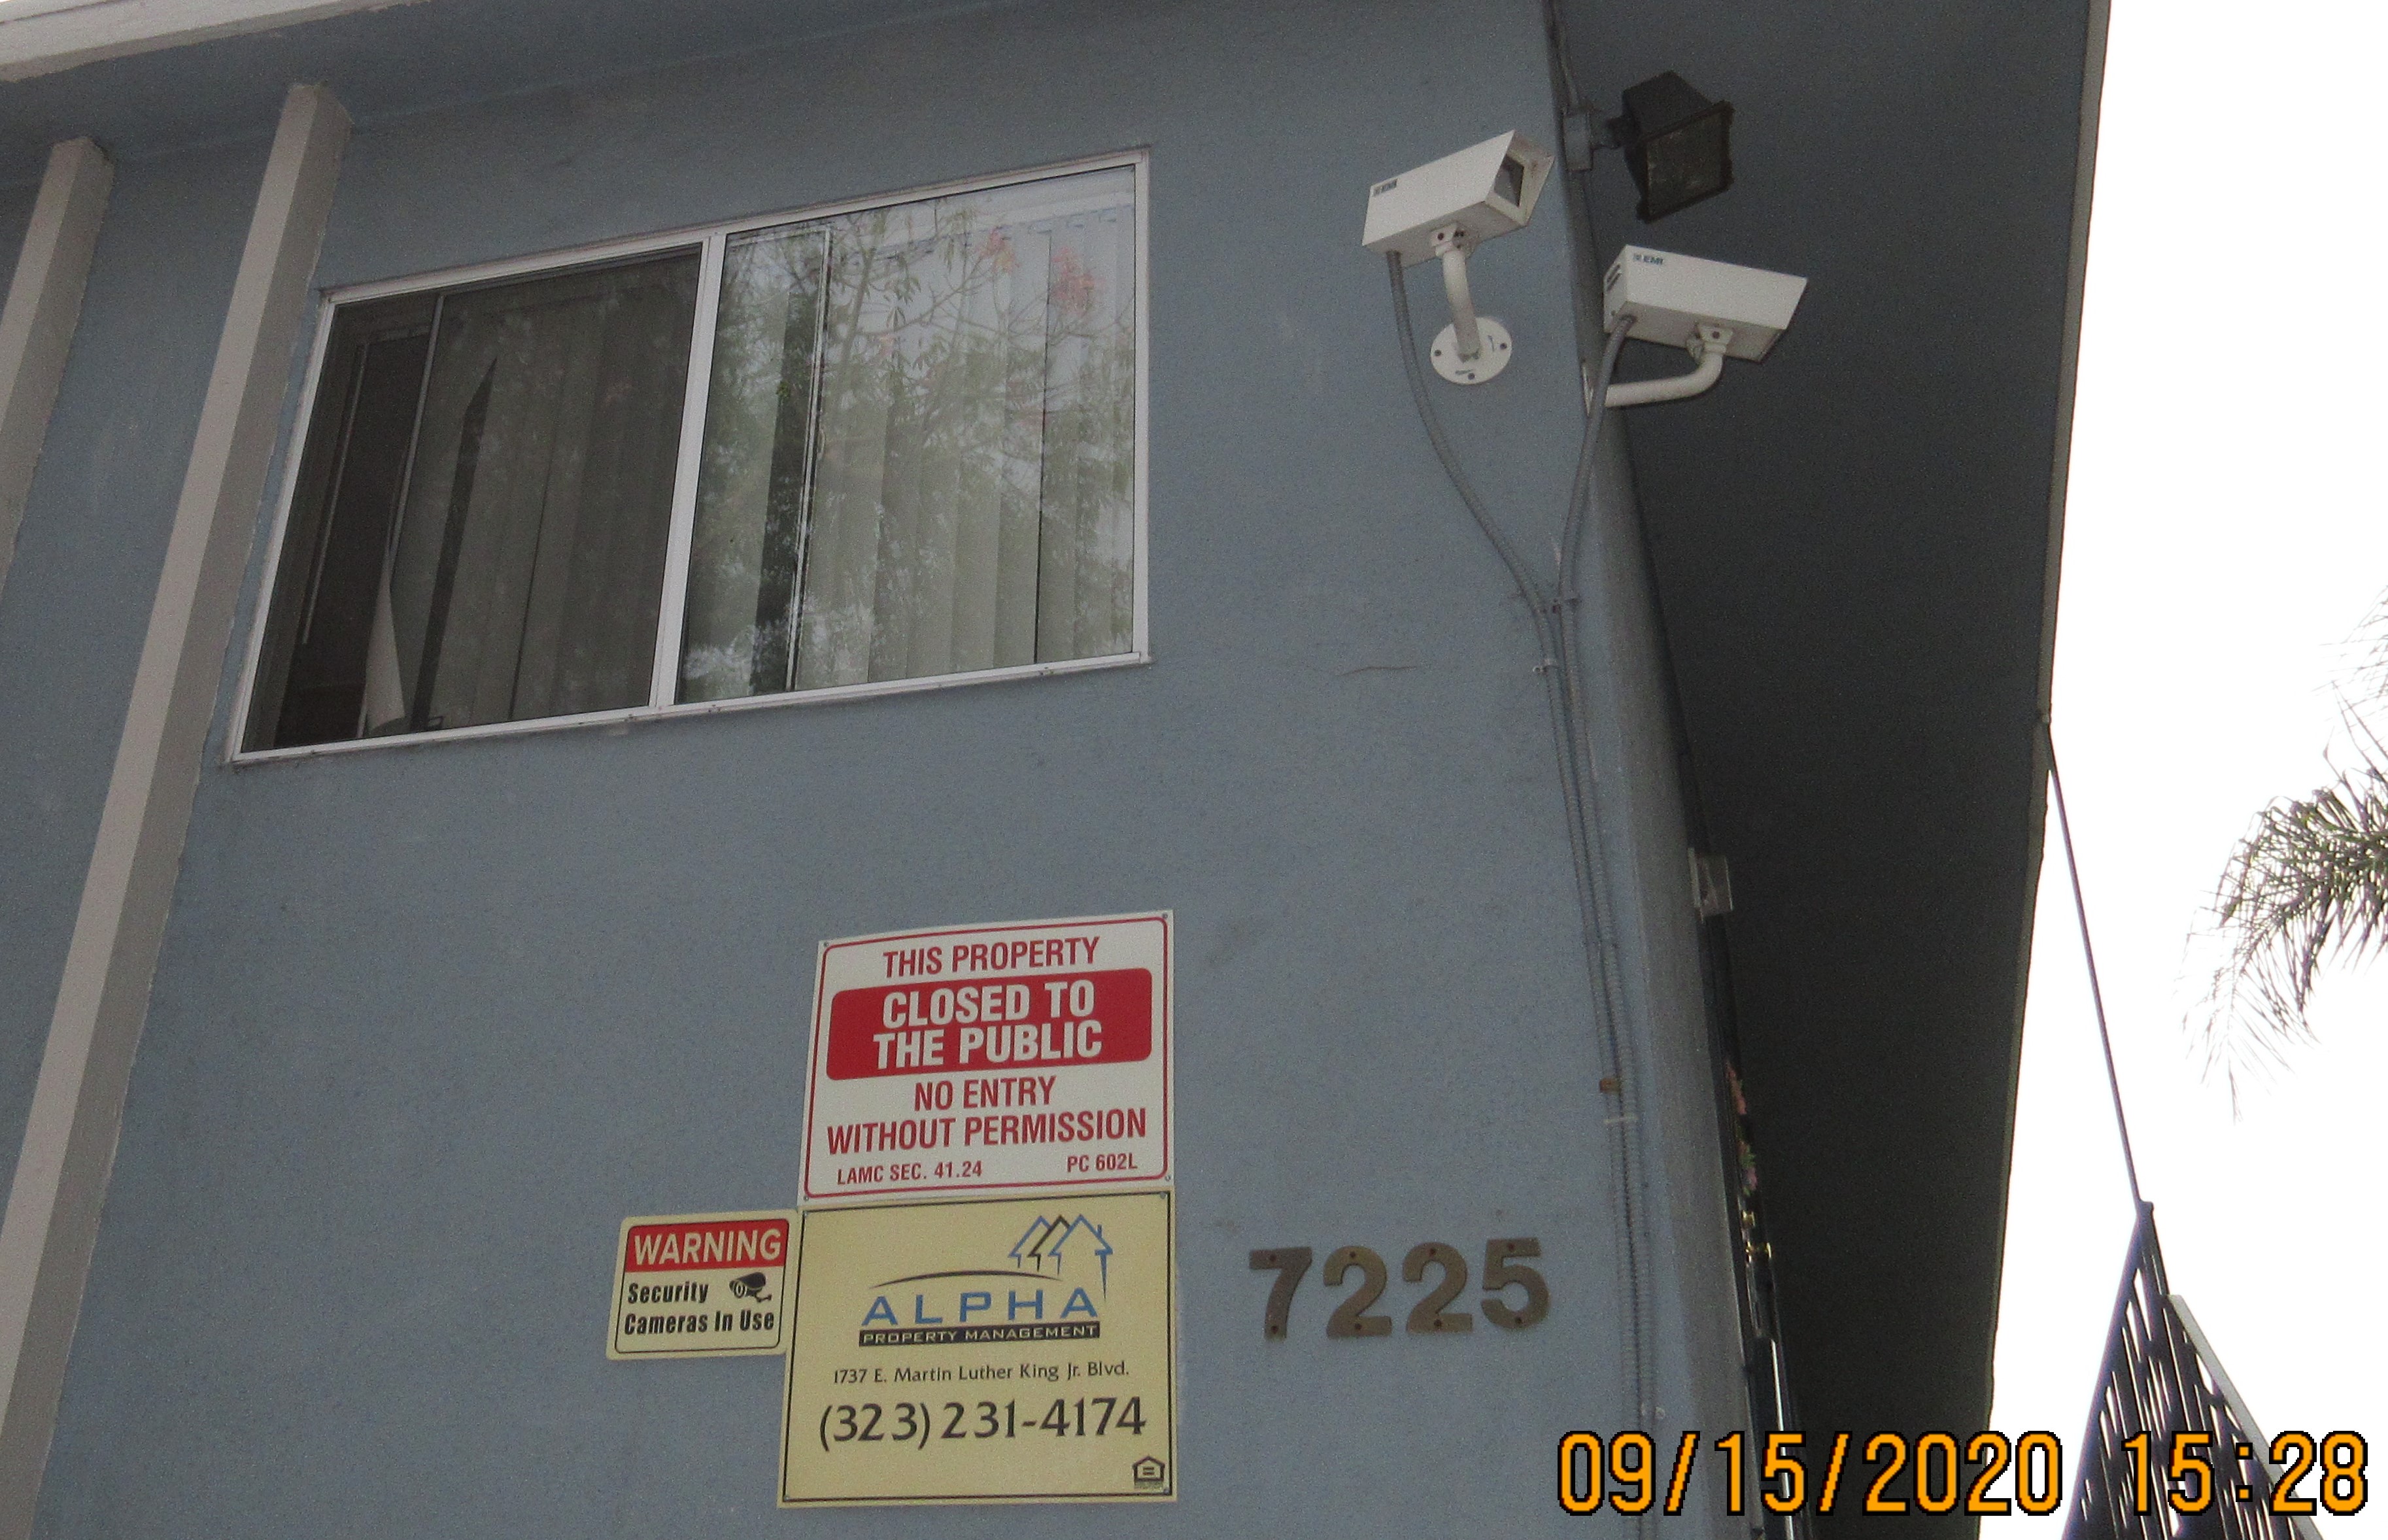 View of private property and management signs on the wall and security cameras.